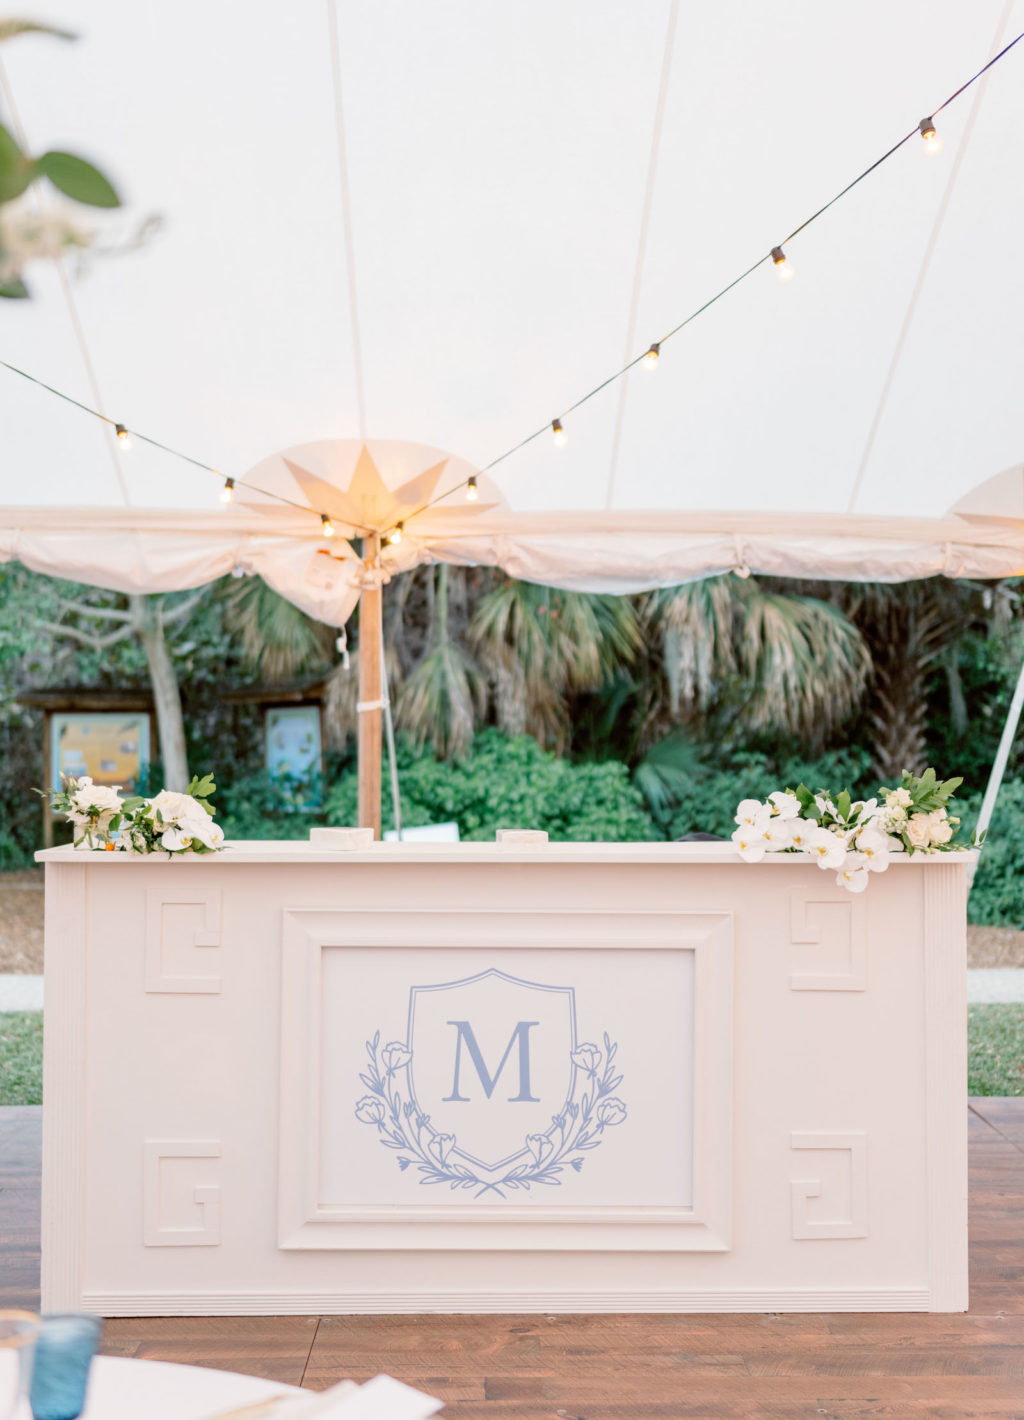 Elegant Luxurious Wedding Reception Decor, White Bar with Dusty Blue Personalized Monogram, Tent Wedding with String Lights | Tampa Bay NK Productions Wedding Planning